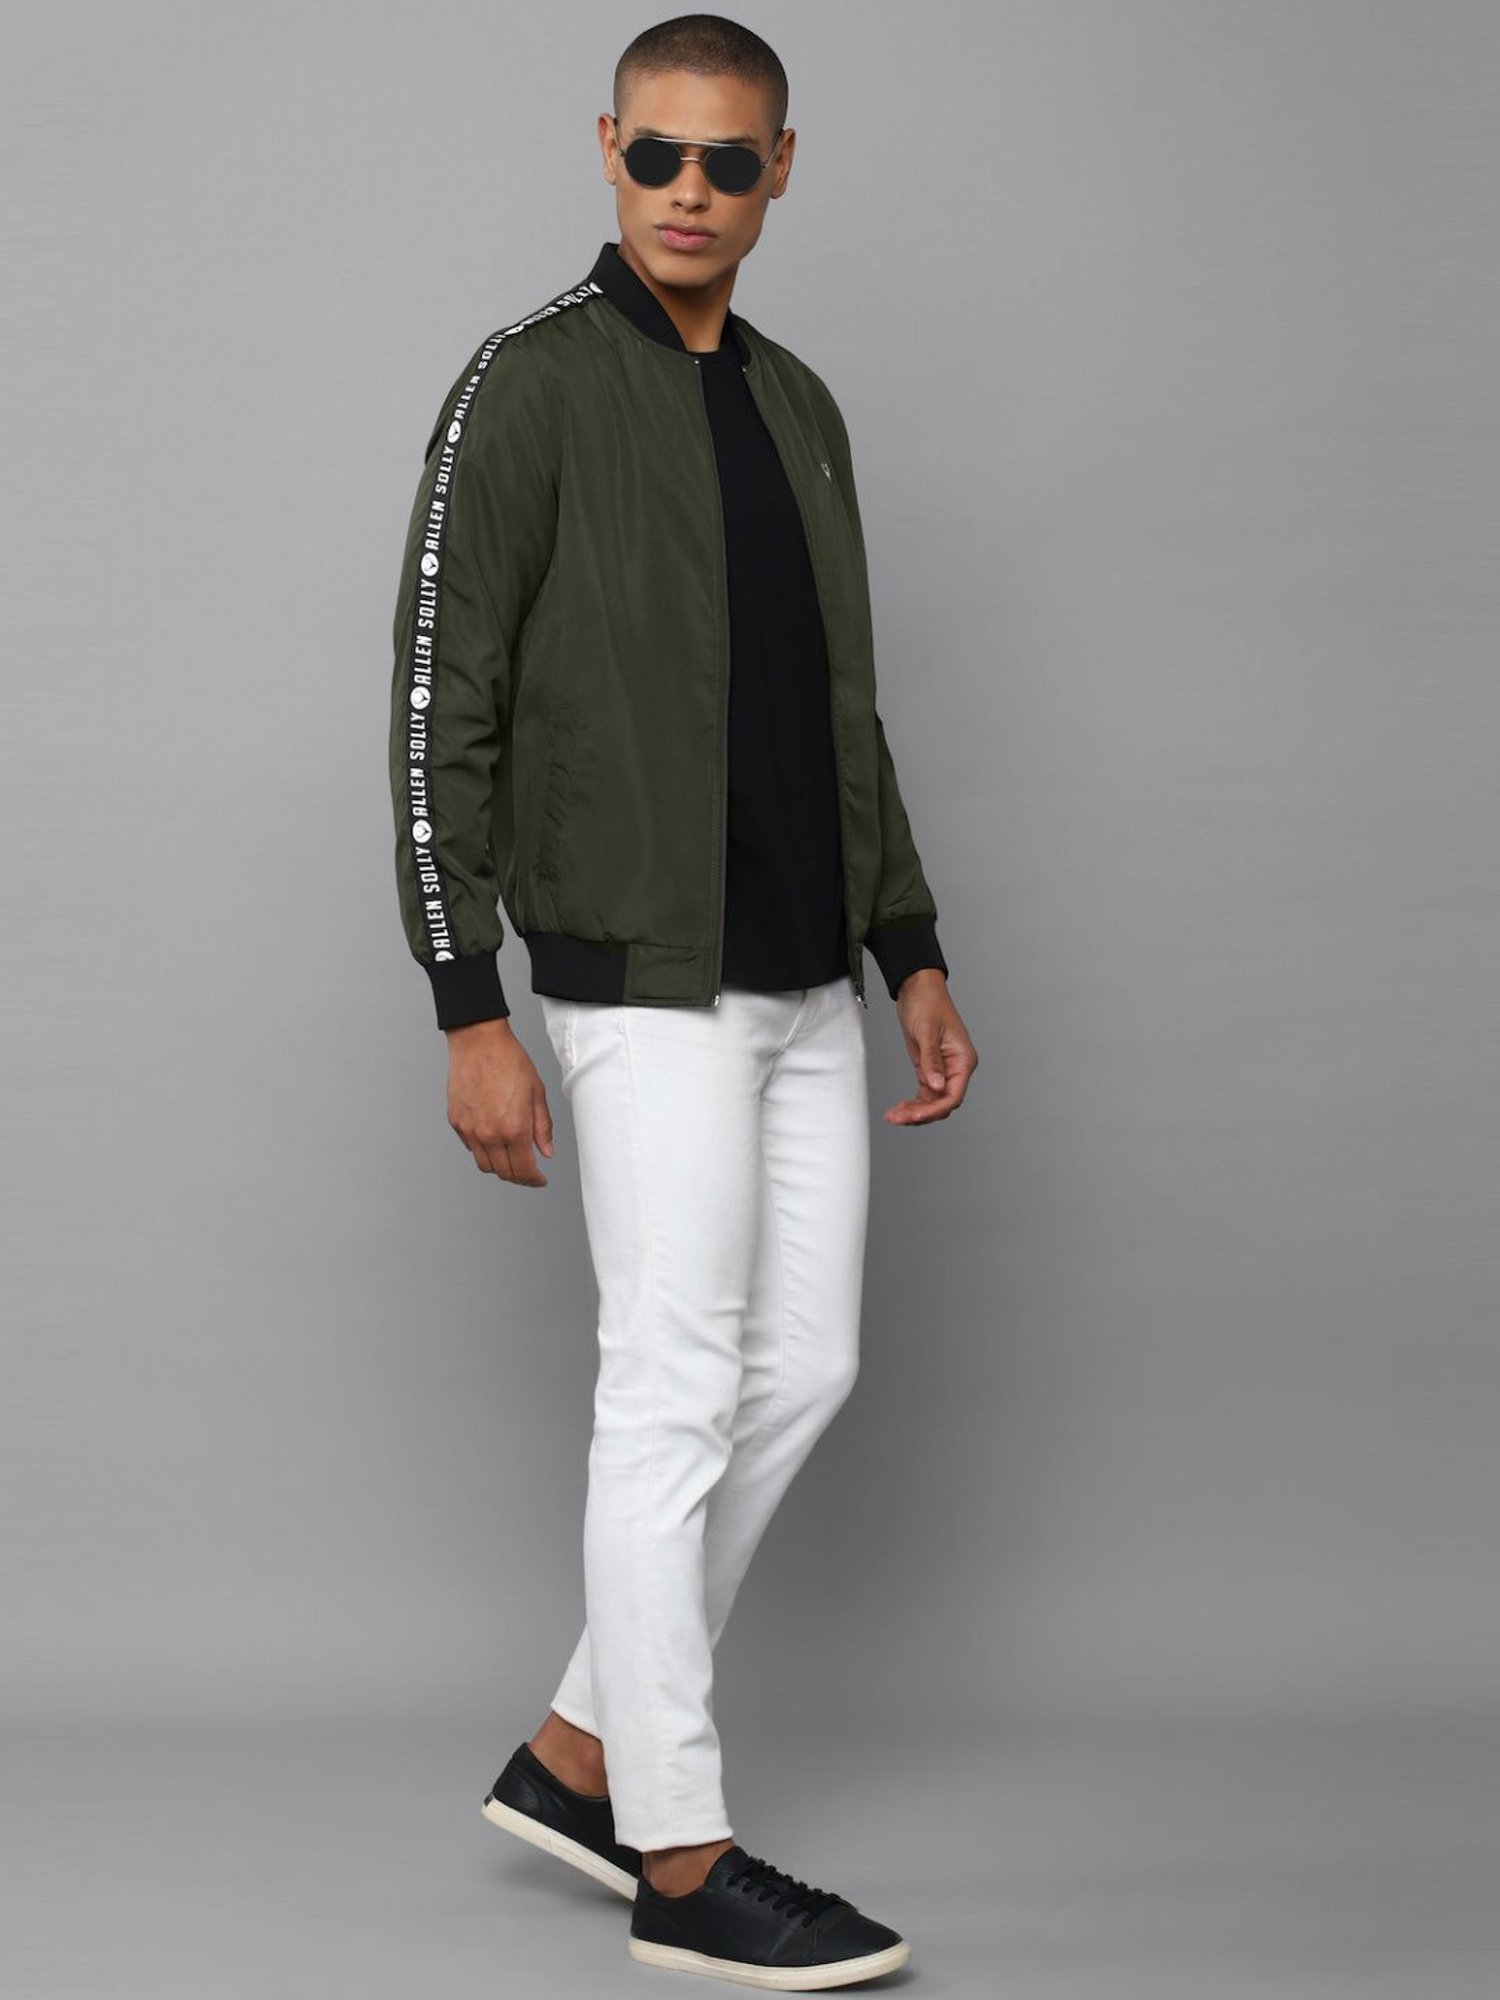 Amazon Sale Offers: Get up to 75% off on men's jackets and sweatshirts from  Fort Collins, Van Heusen and more | - Times of India